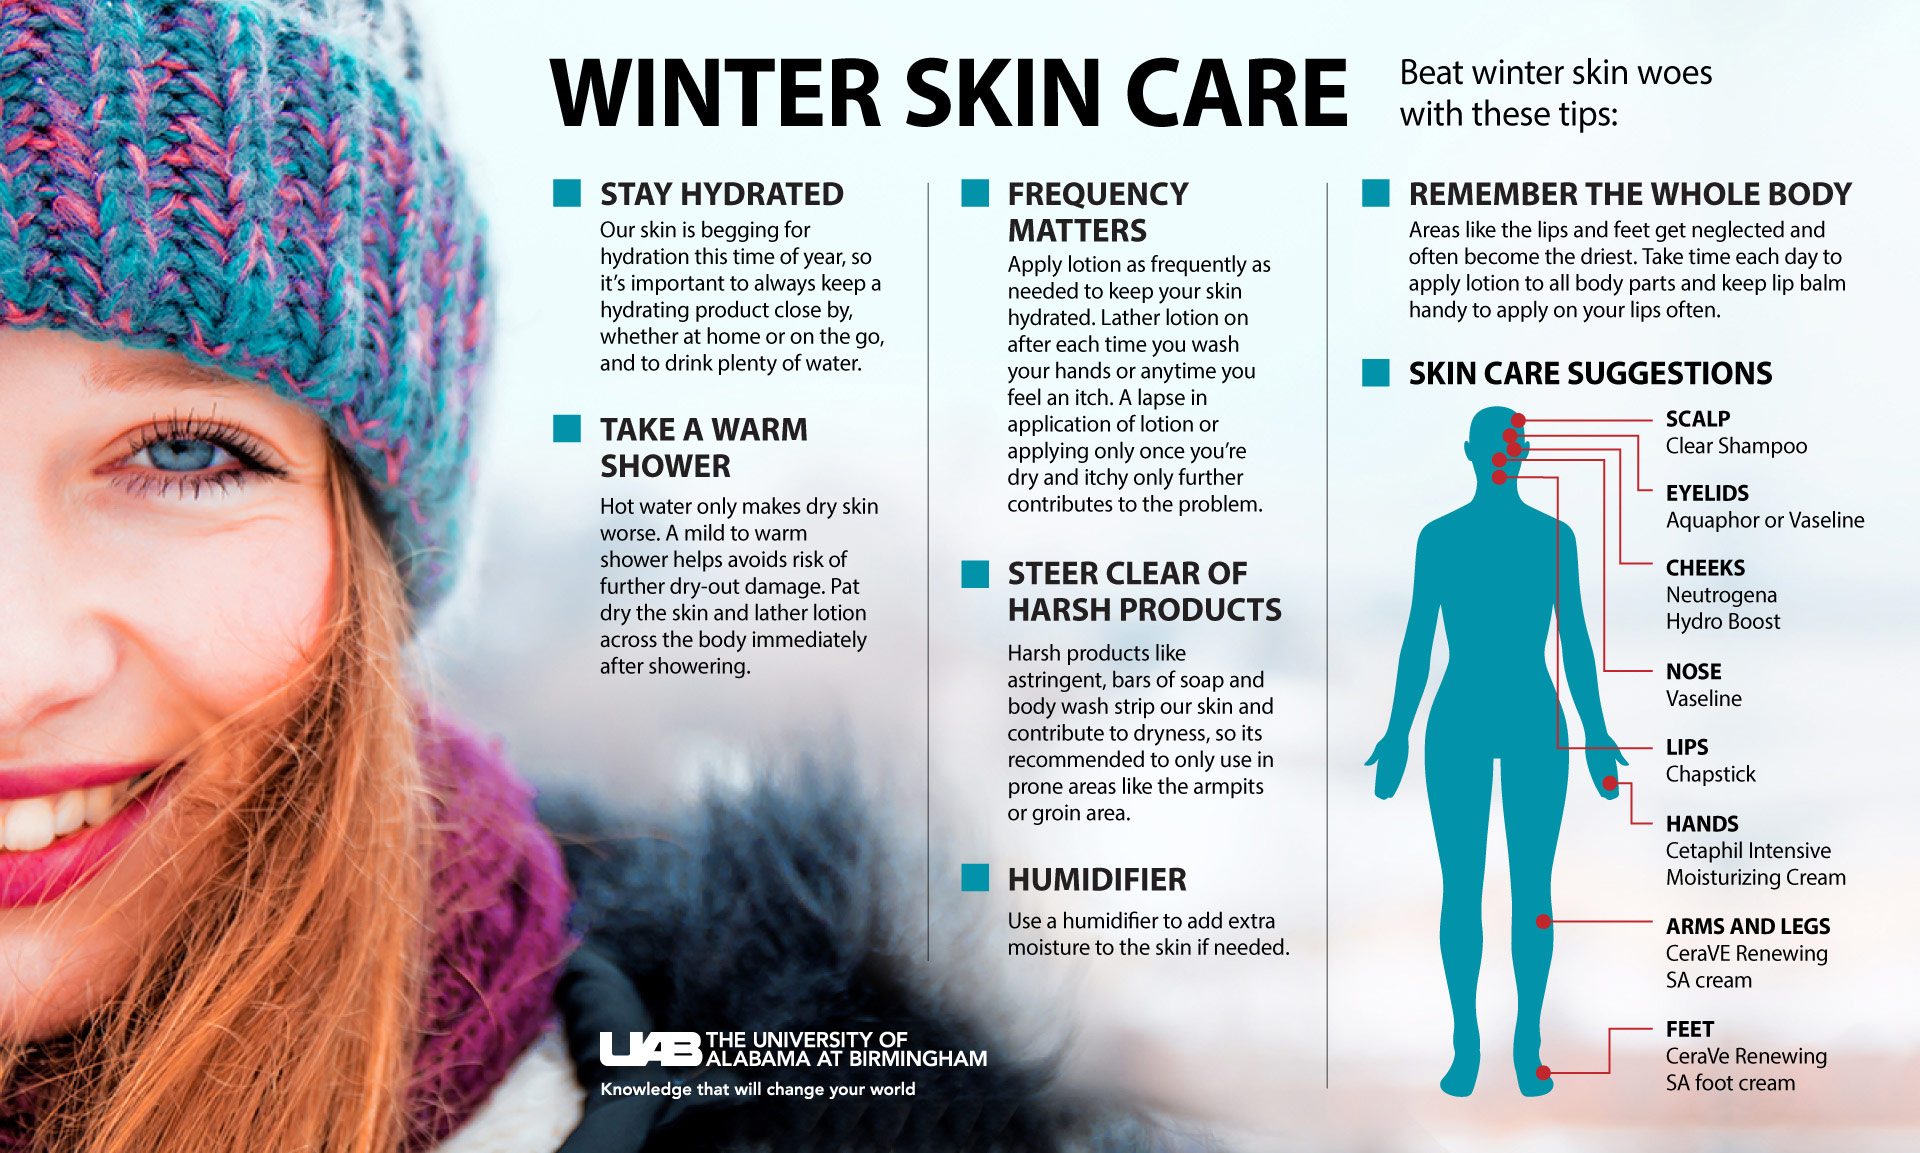 7 Best Winter Tips For Skin So You Stay Glowing When Its Cold